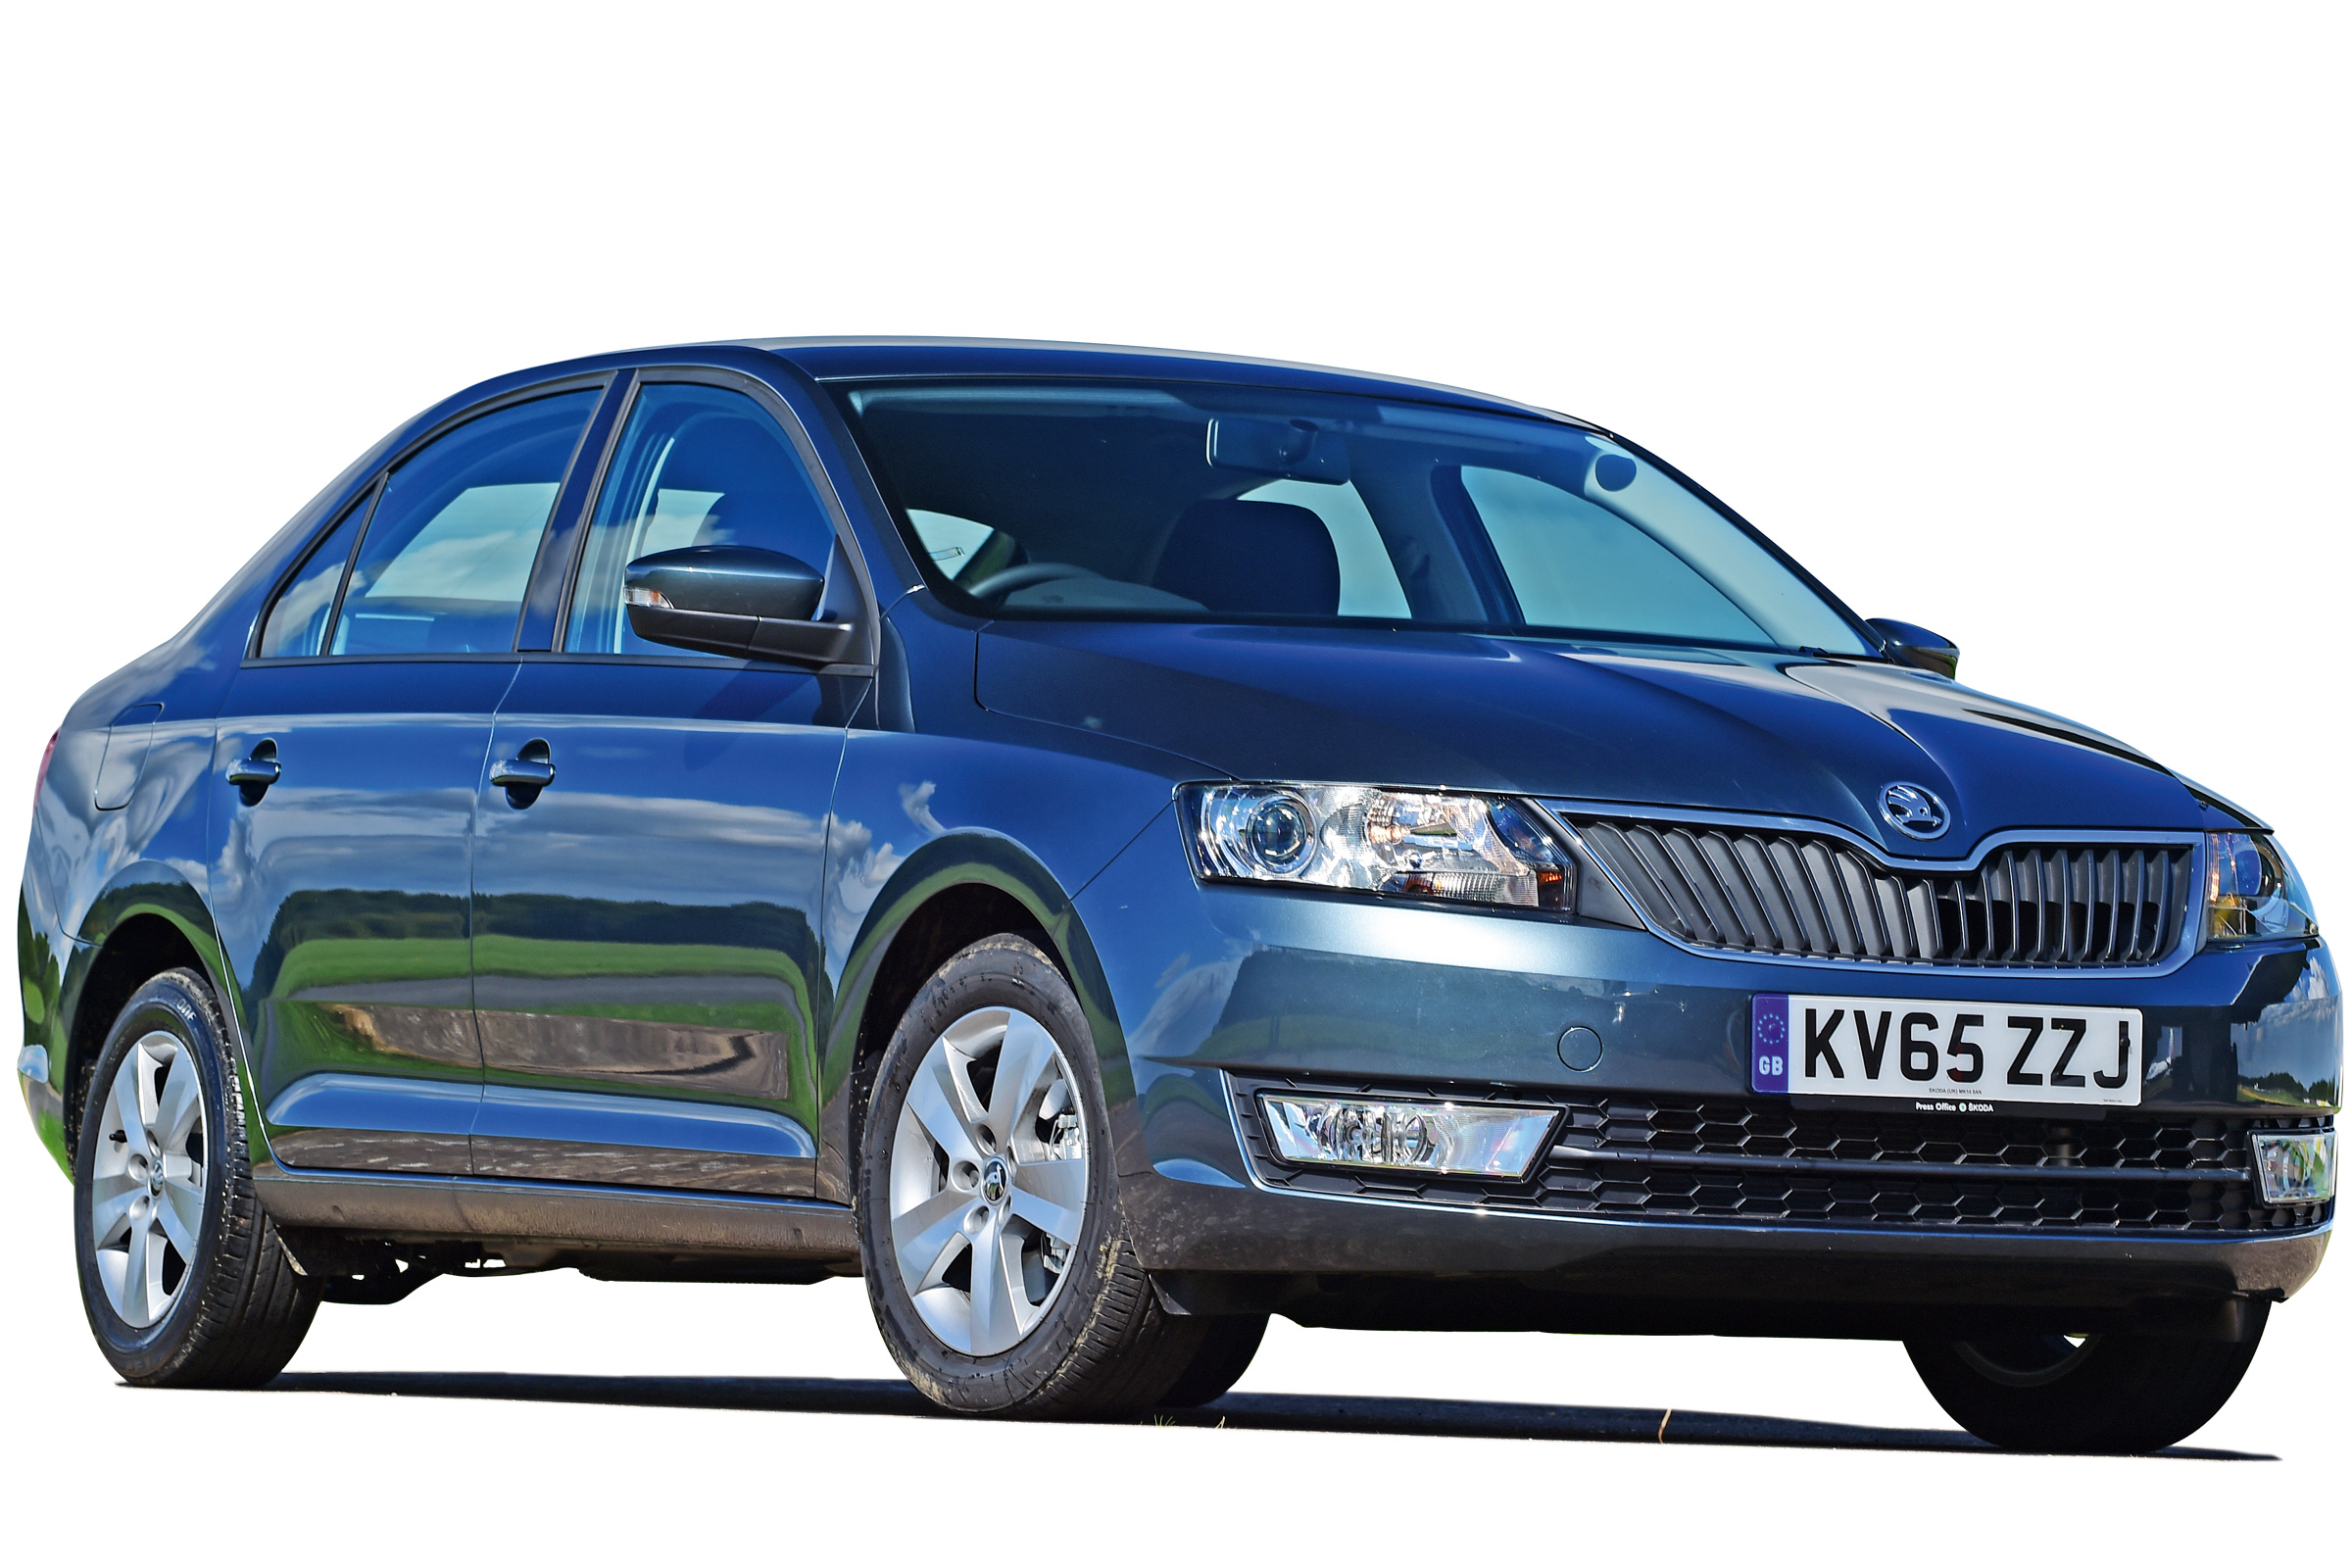 Skoda Rapid Owner Reviews: MPG, Problems & Reliability